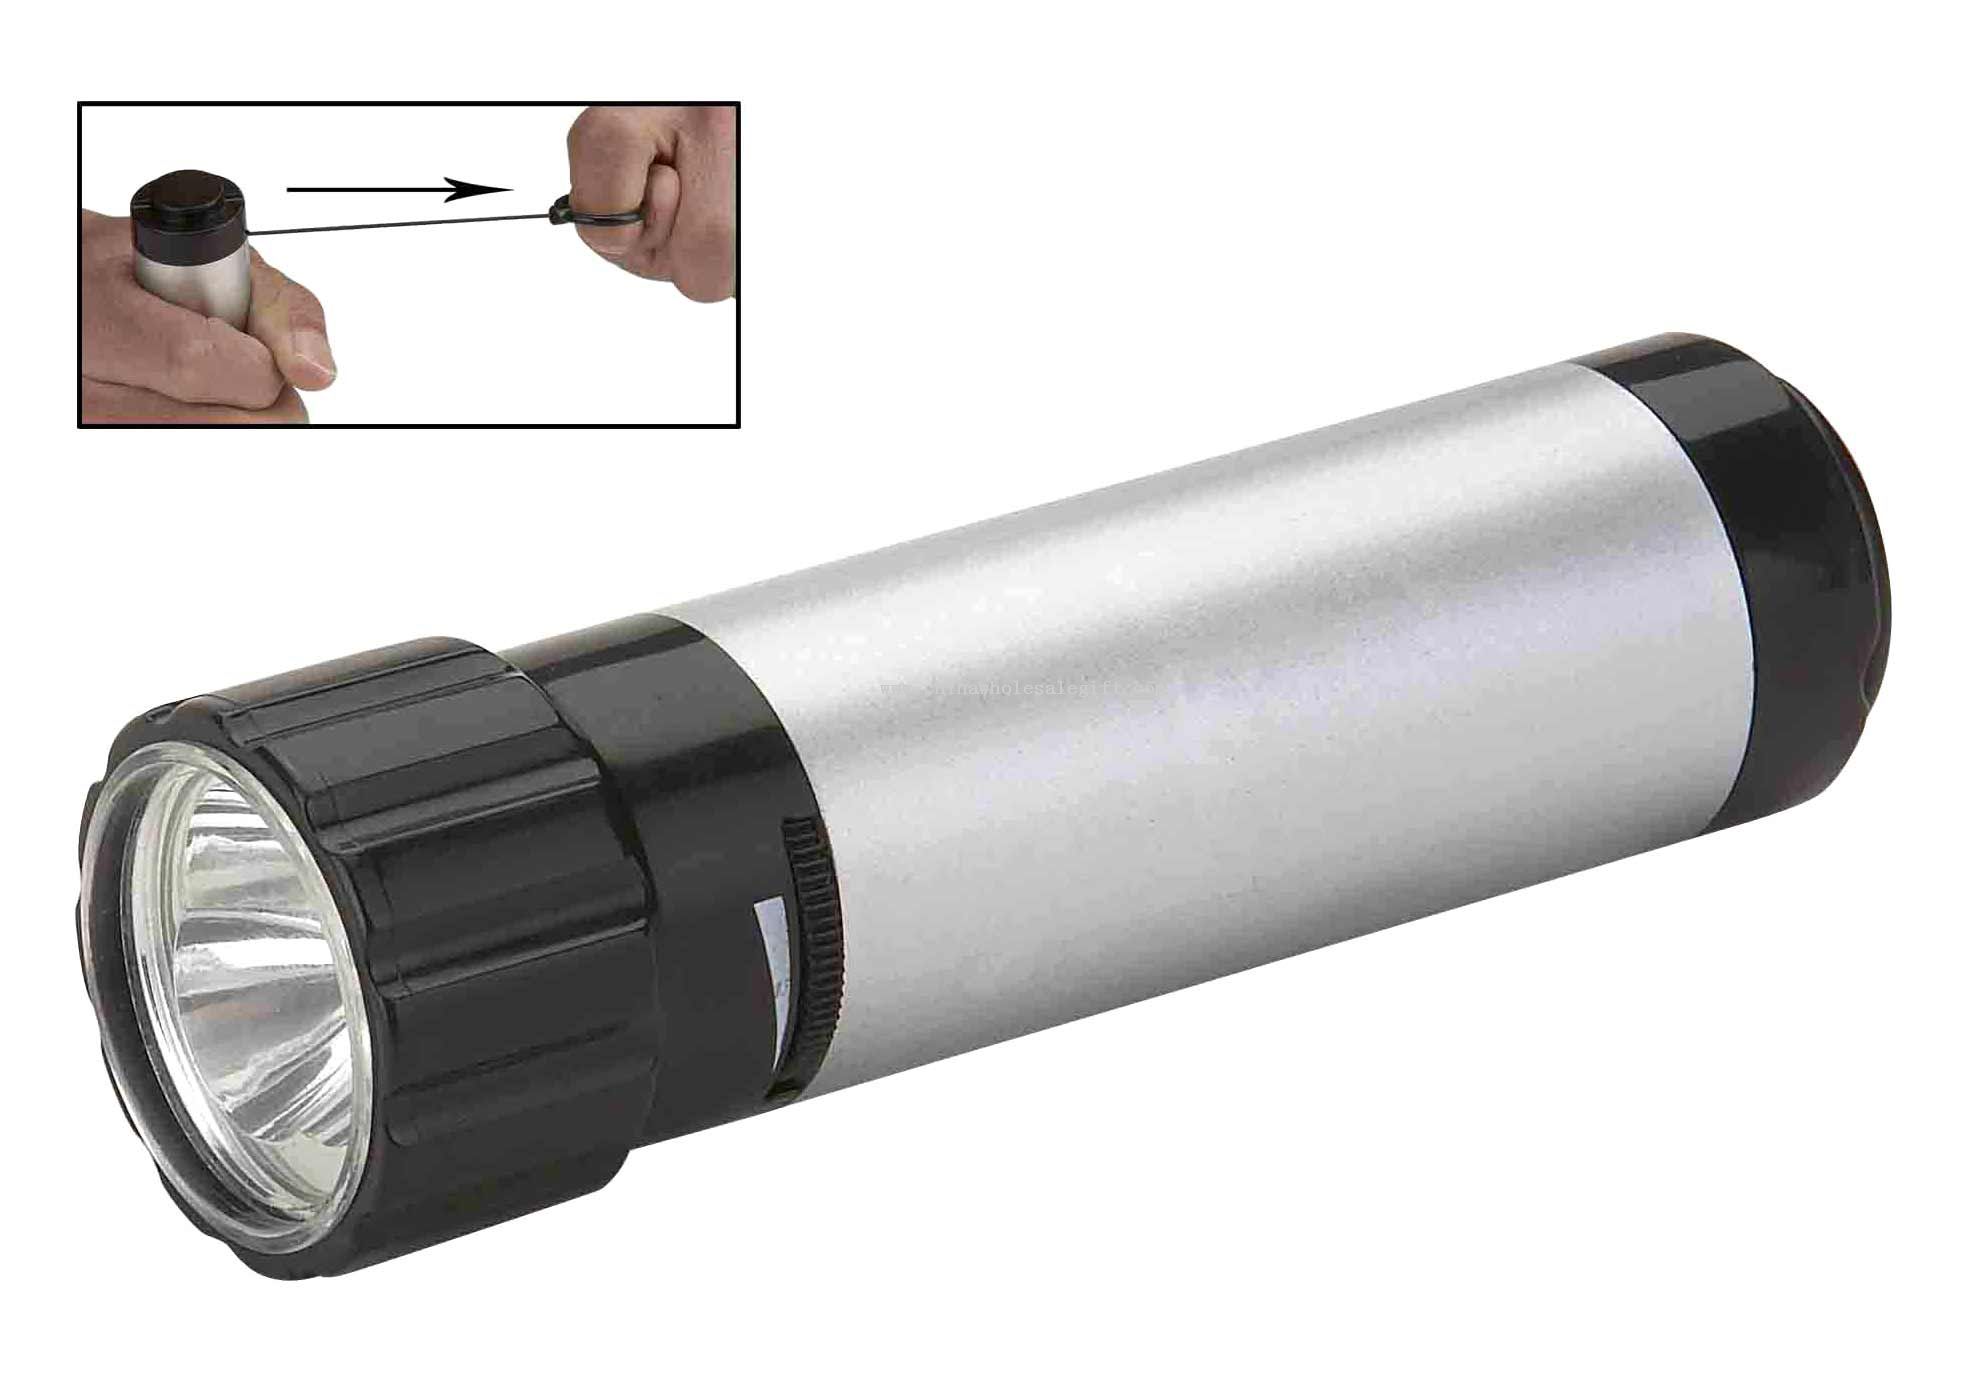 Pull Chargeable Flashlight